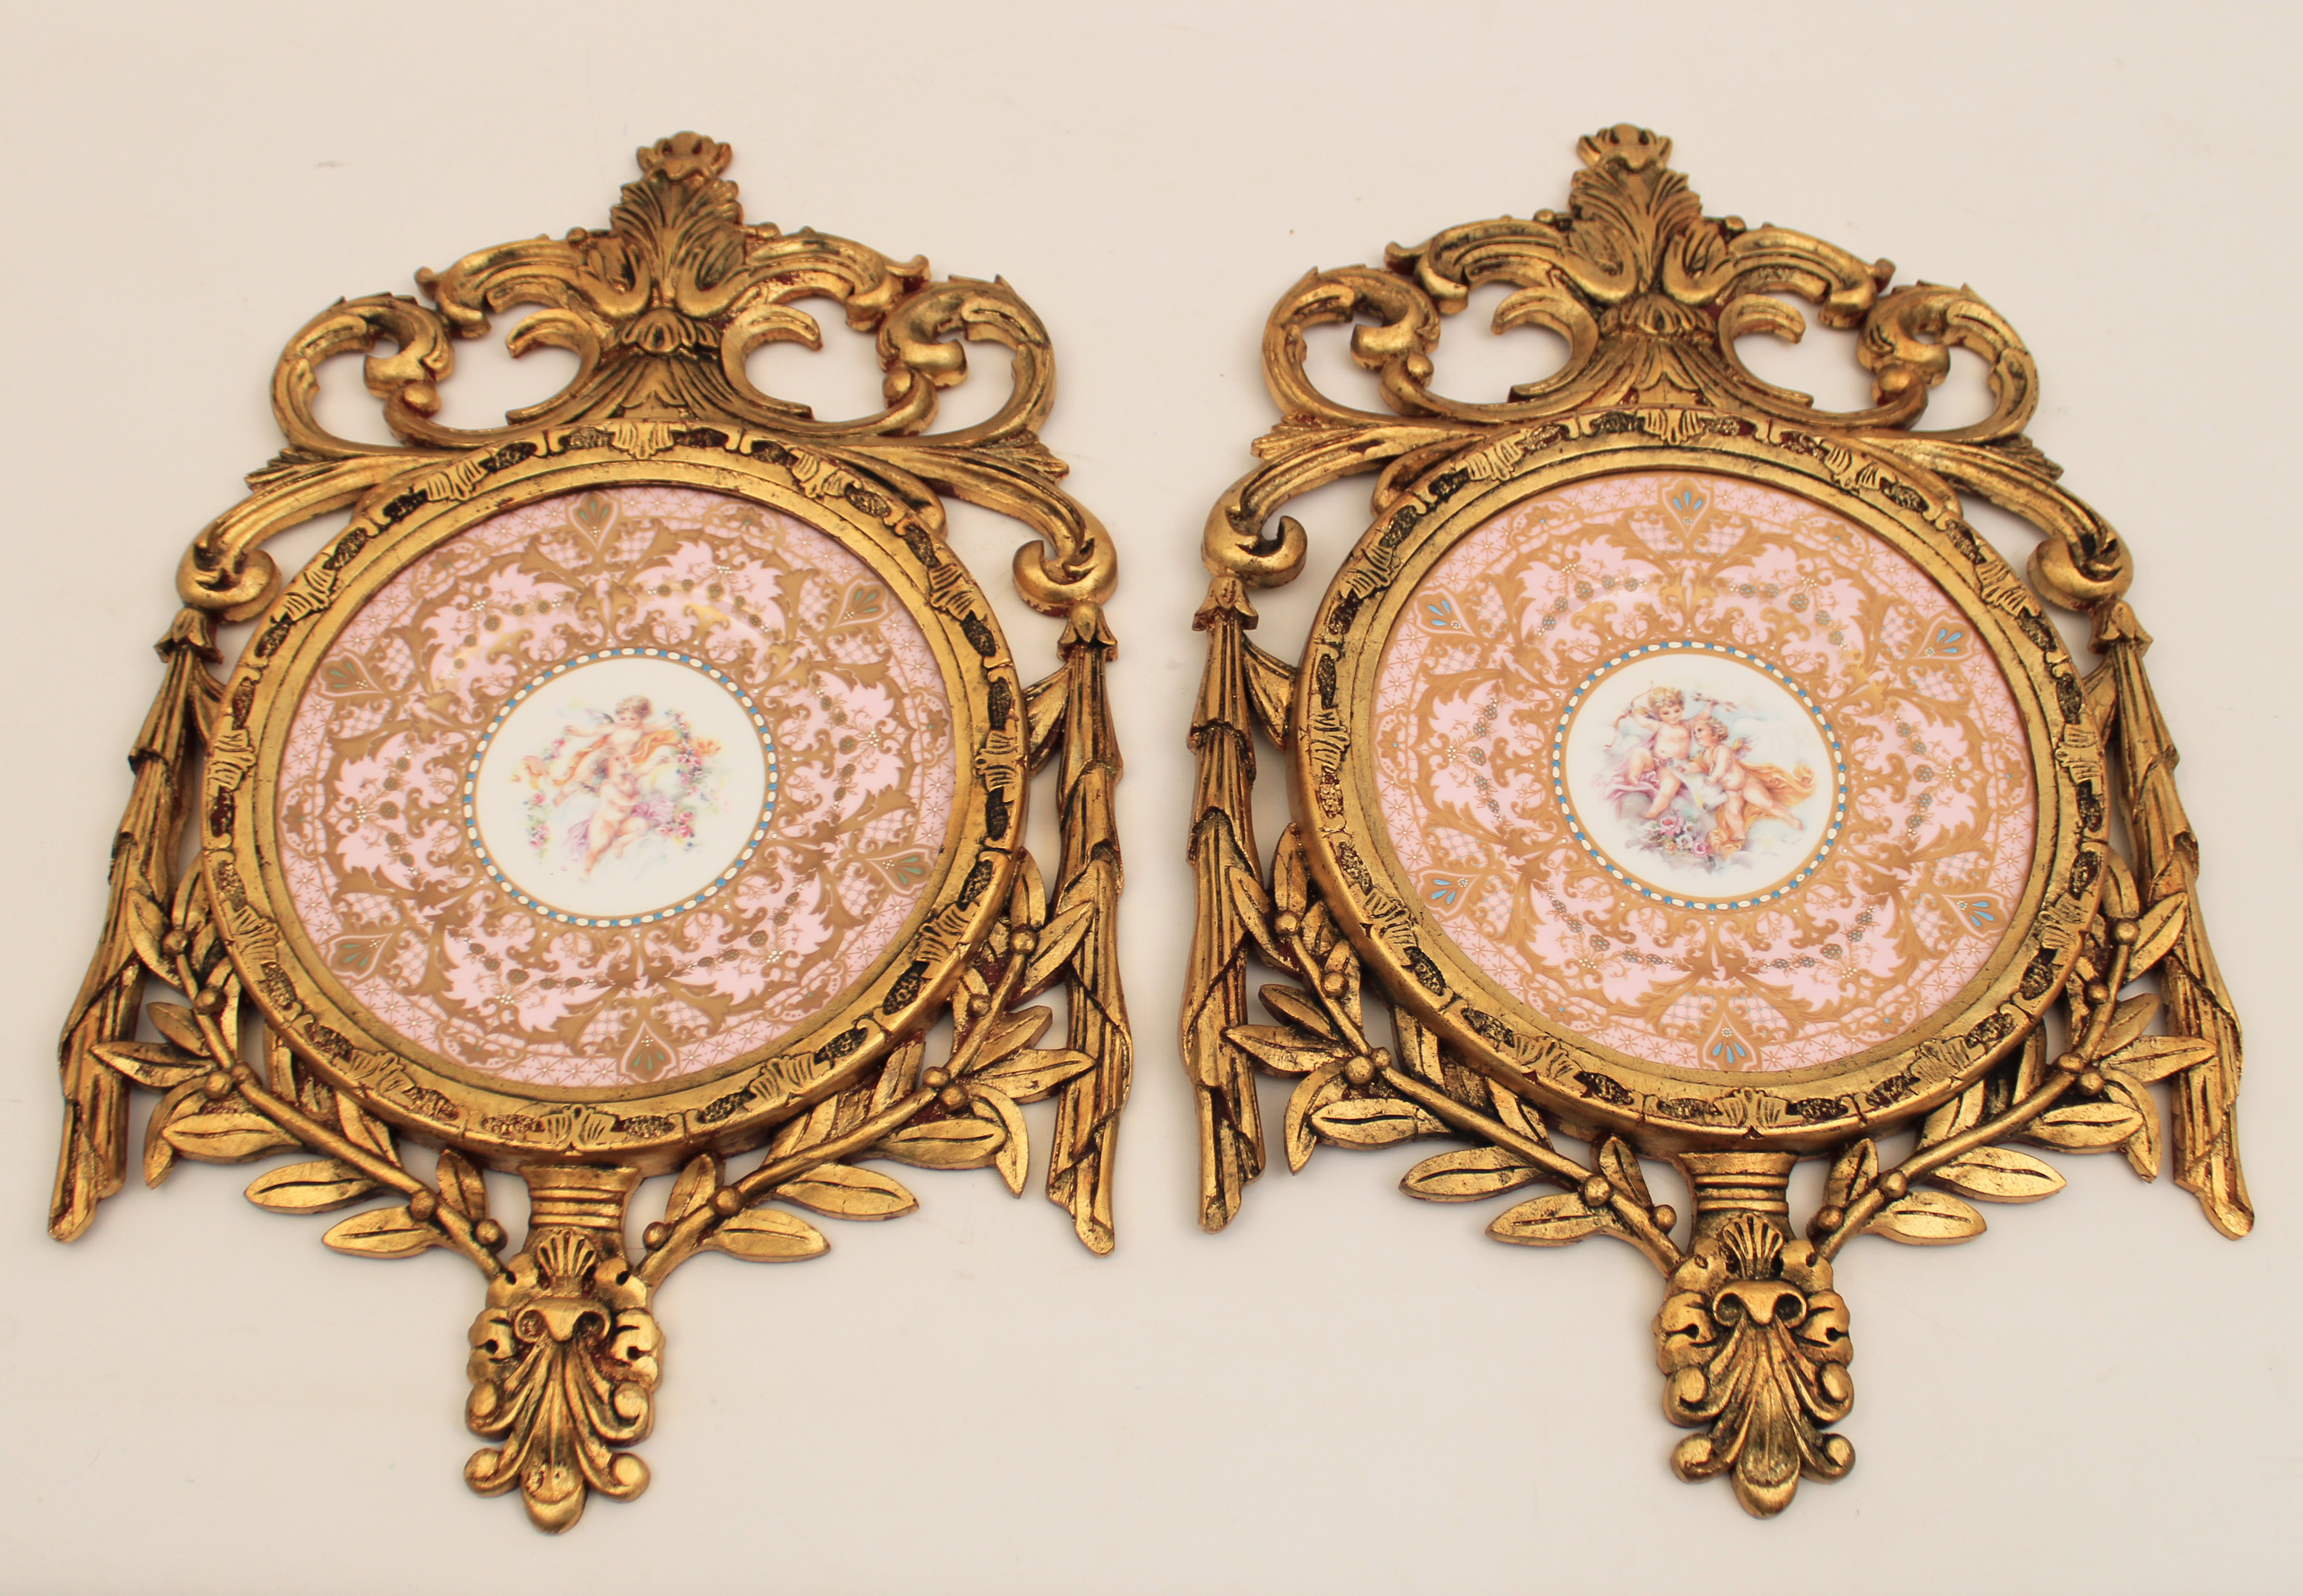 PR OF FRENCH STYLE OPEN GOLD GILTWOOD 35ed88